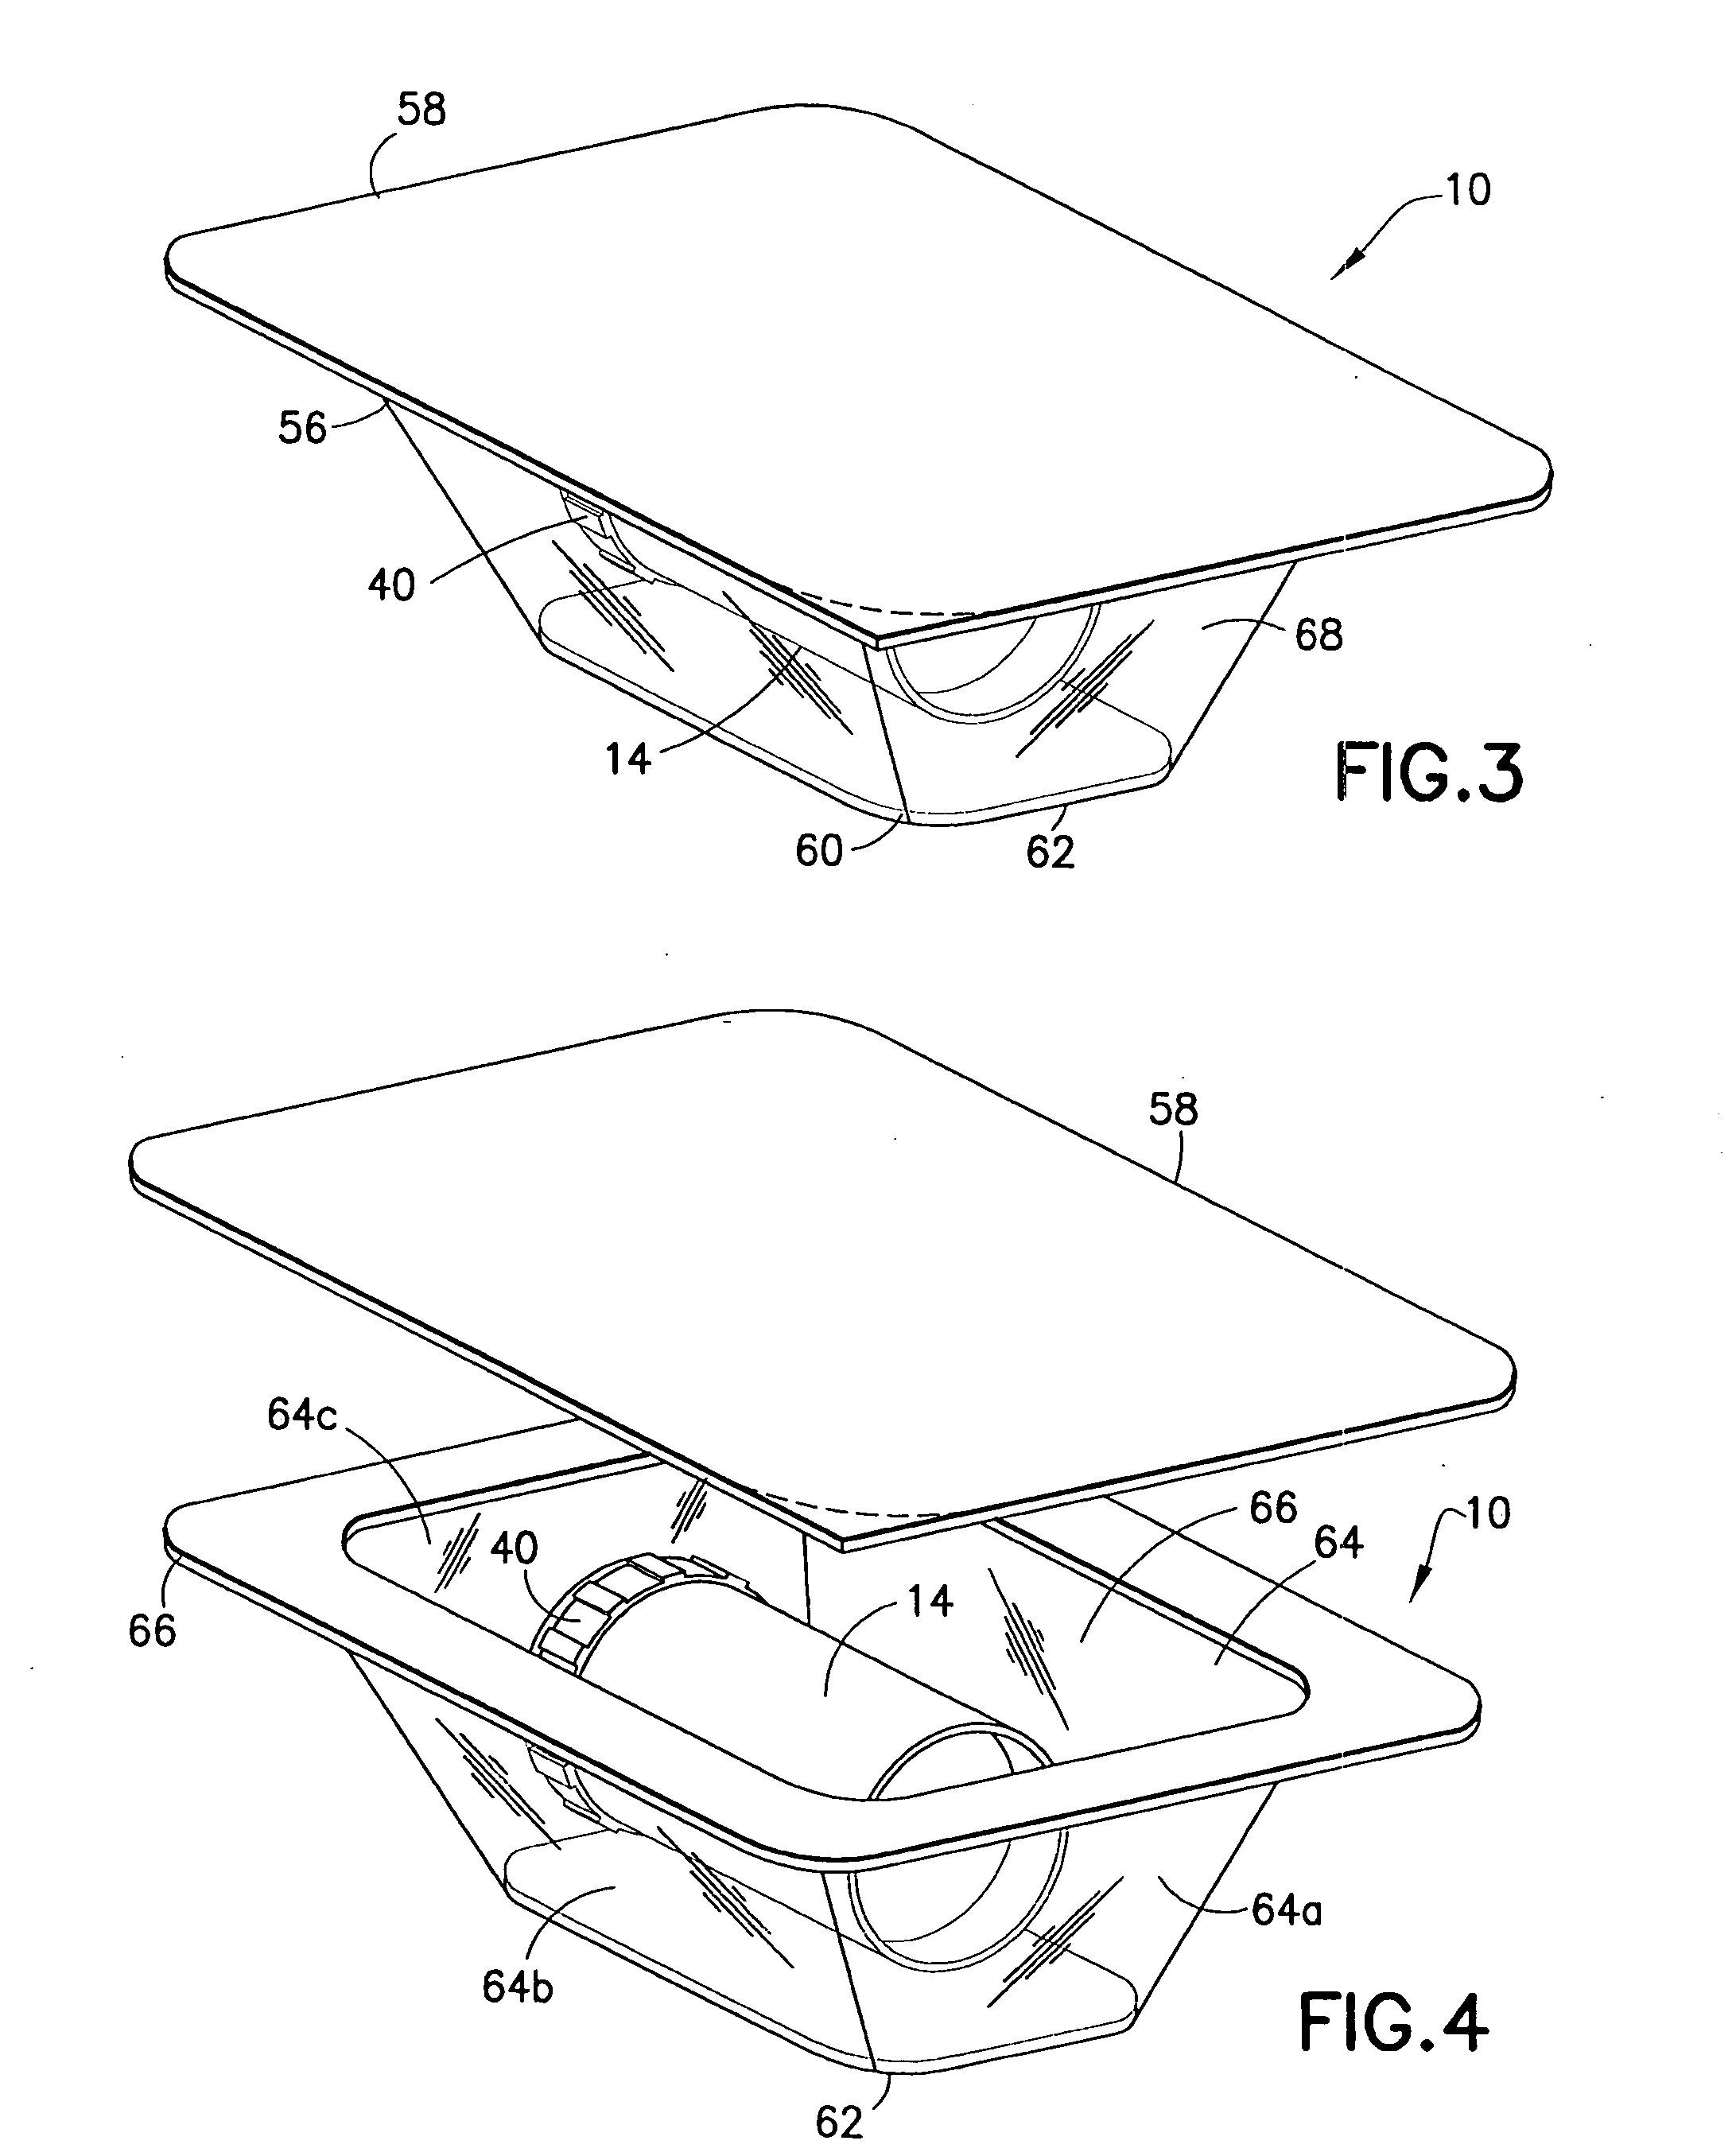 Tissue preservation assembly and method of making and using the same